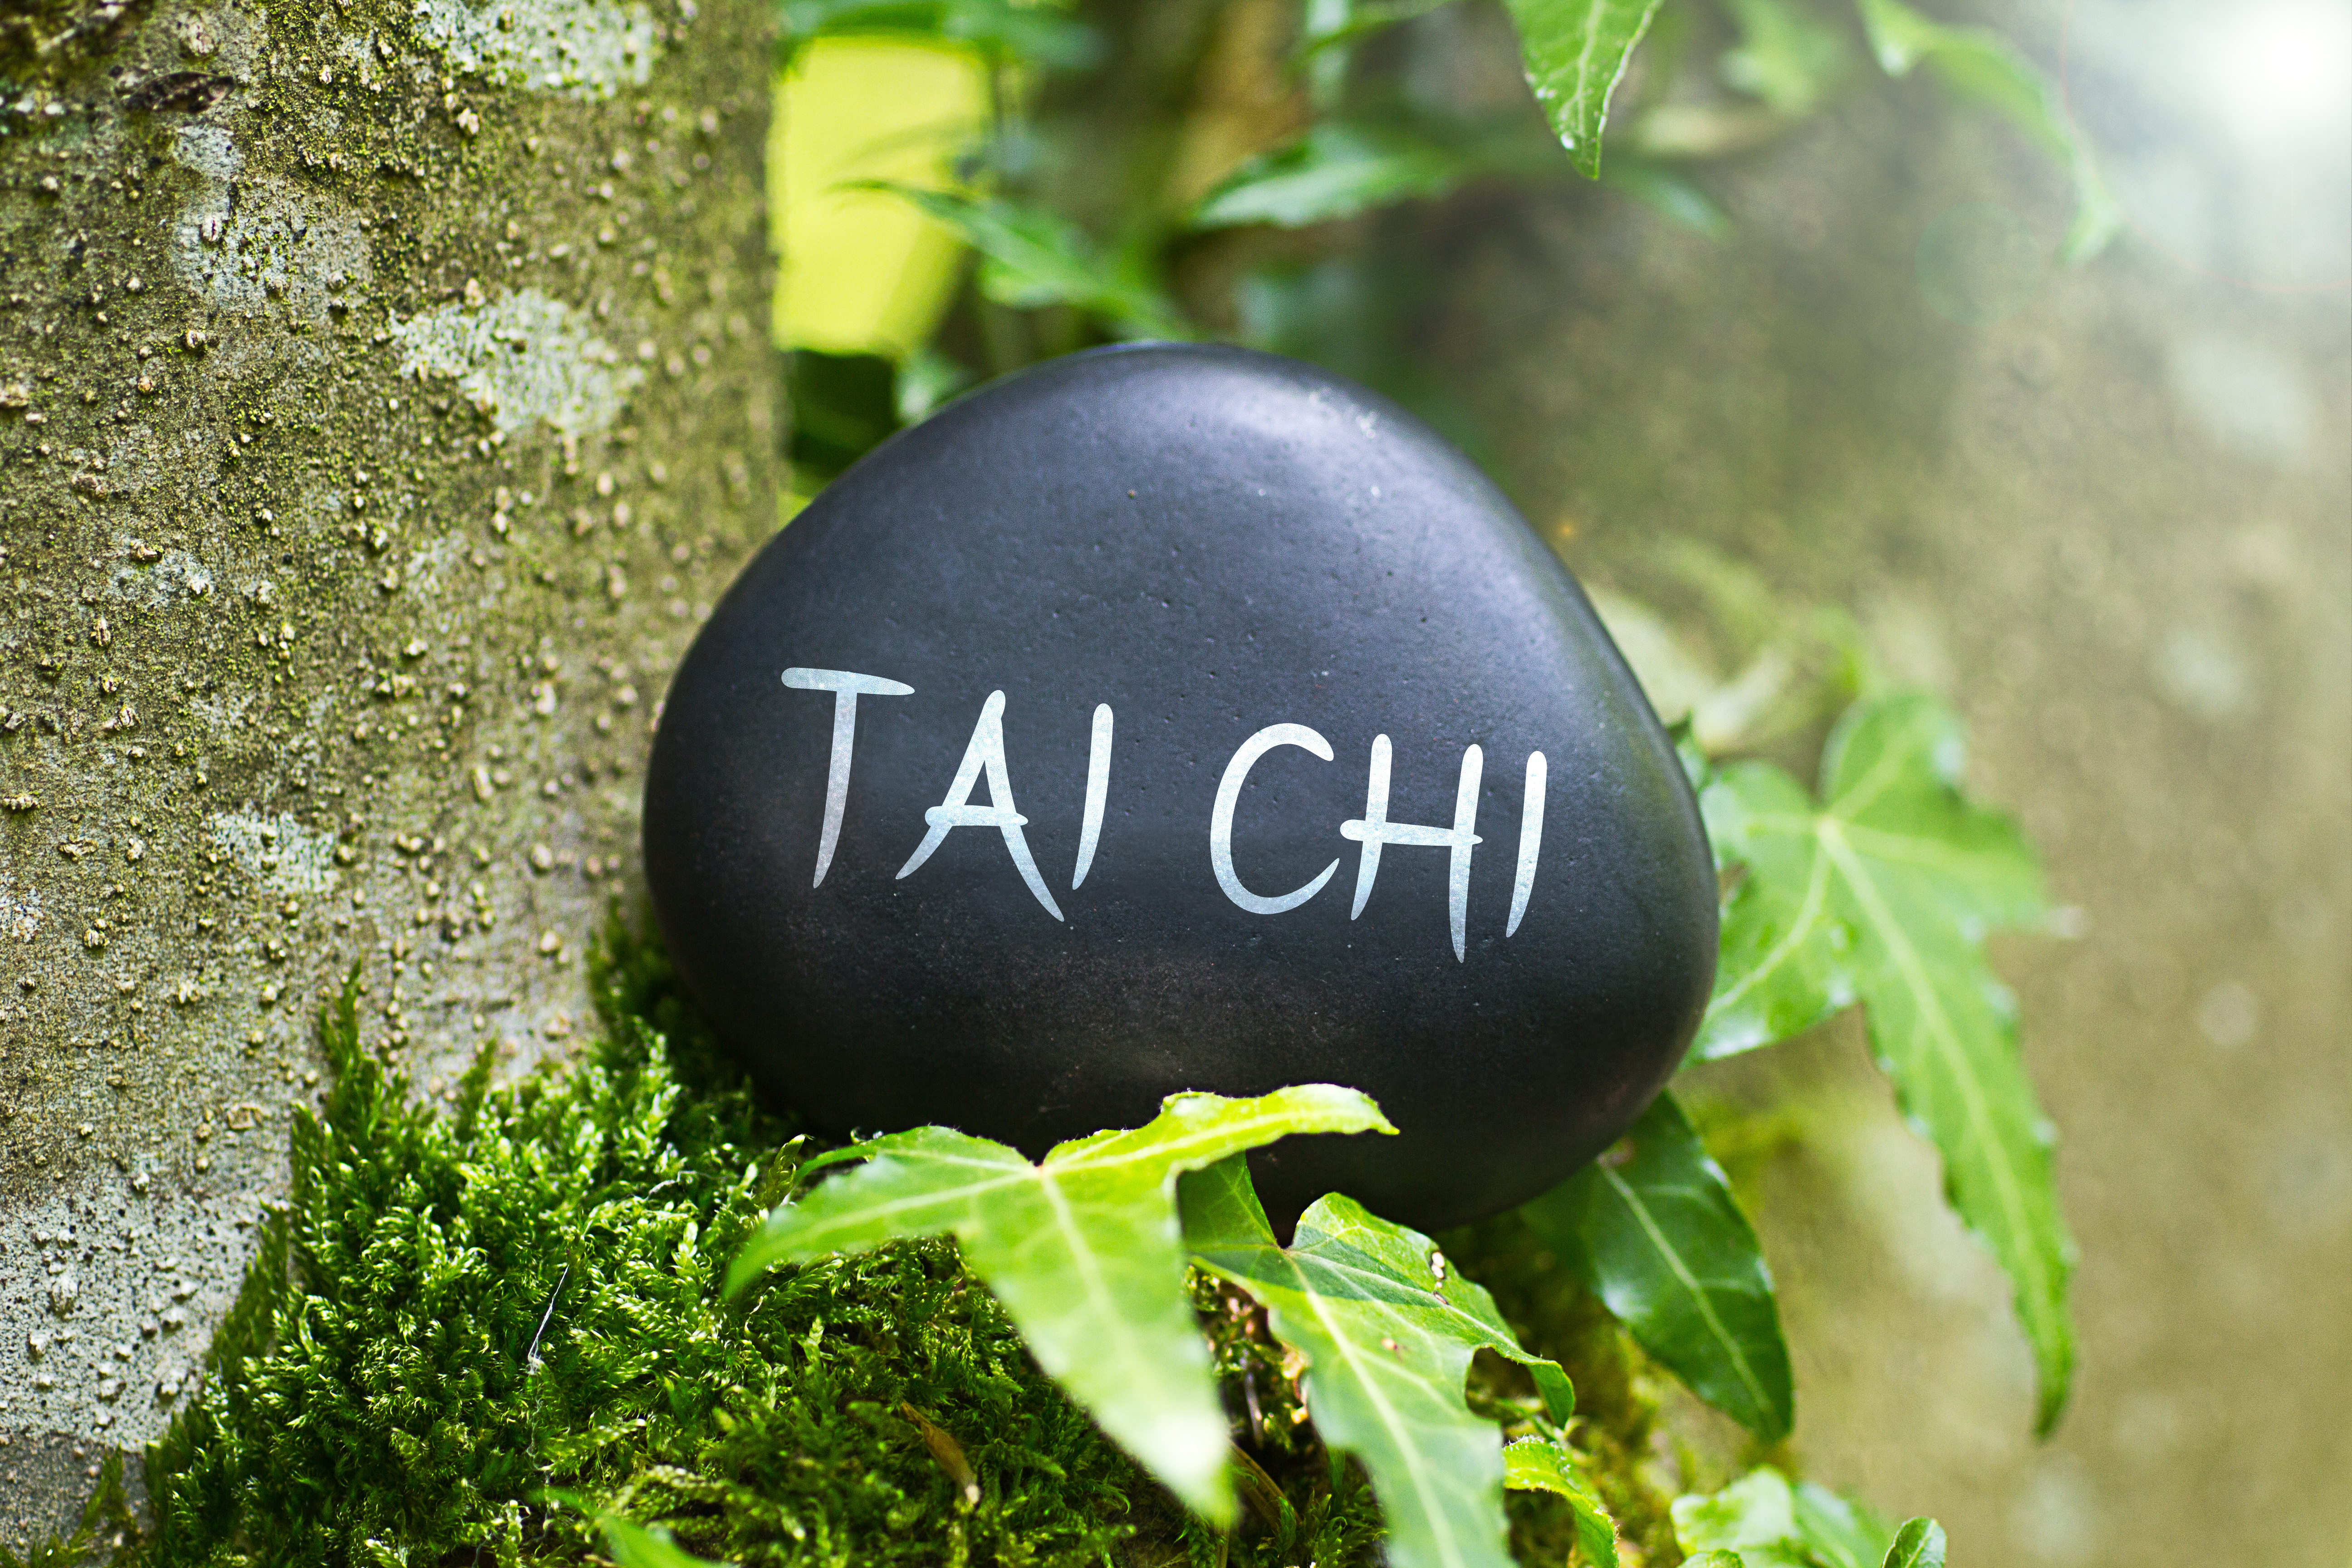 How Tai Chi Could Improve Your Health